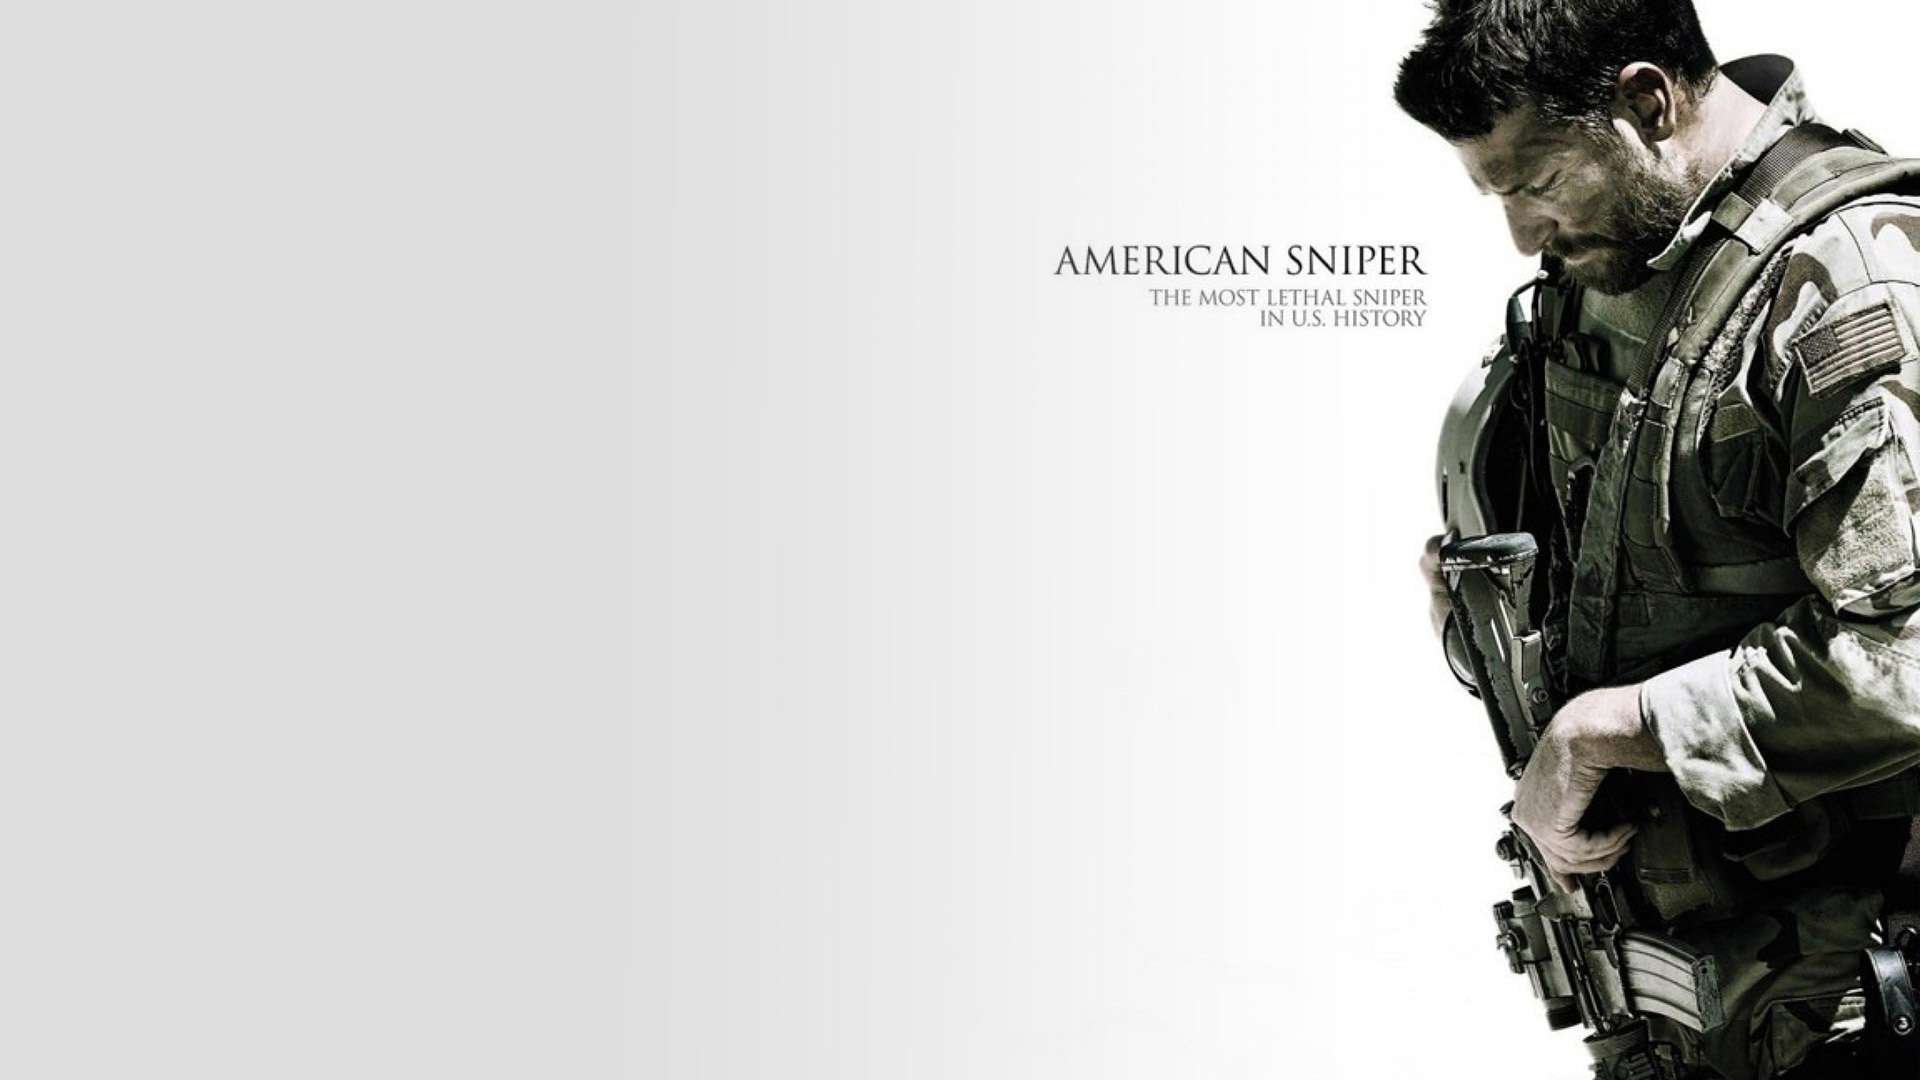 american, Sniper, Biography, Action, Military, Warrior, Soldier, 1americansniper, Clint, Eastwood, War, Fighting, Weapon, Gun Wallpaper